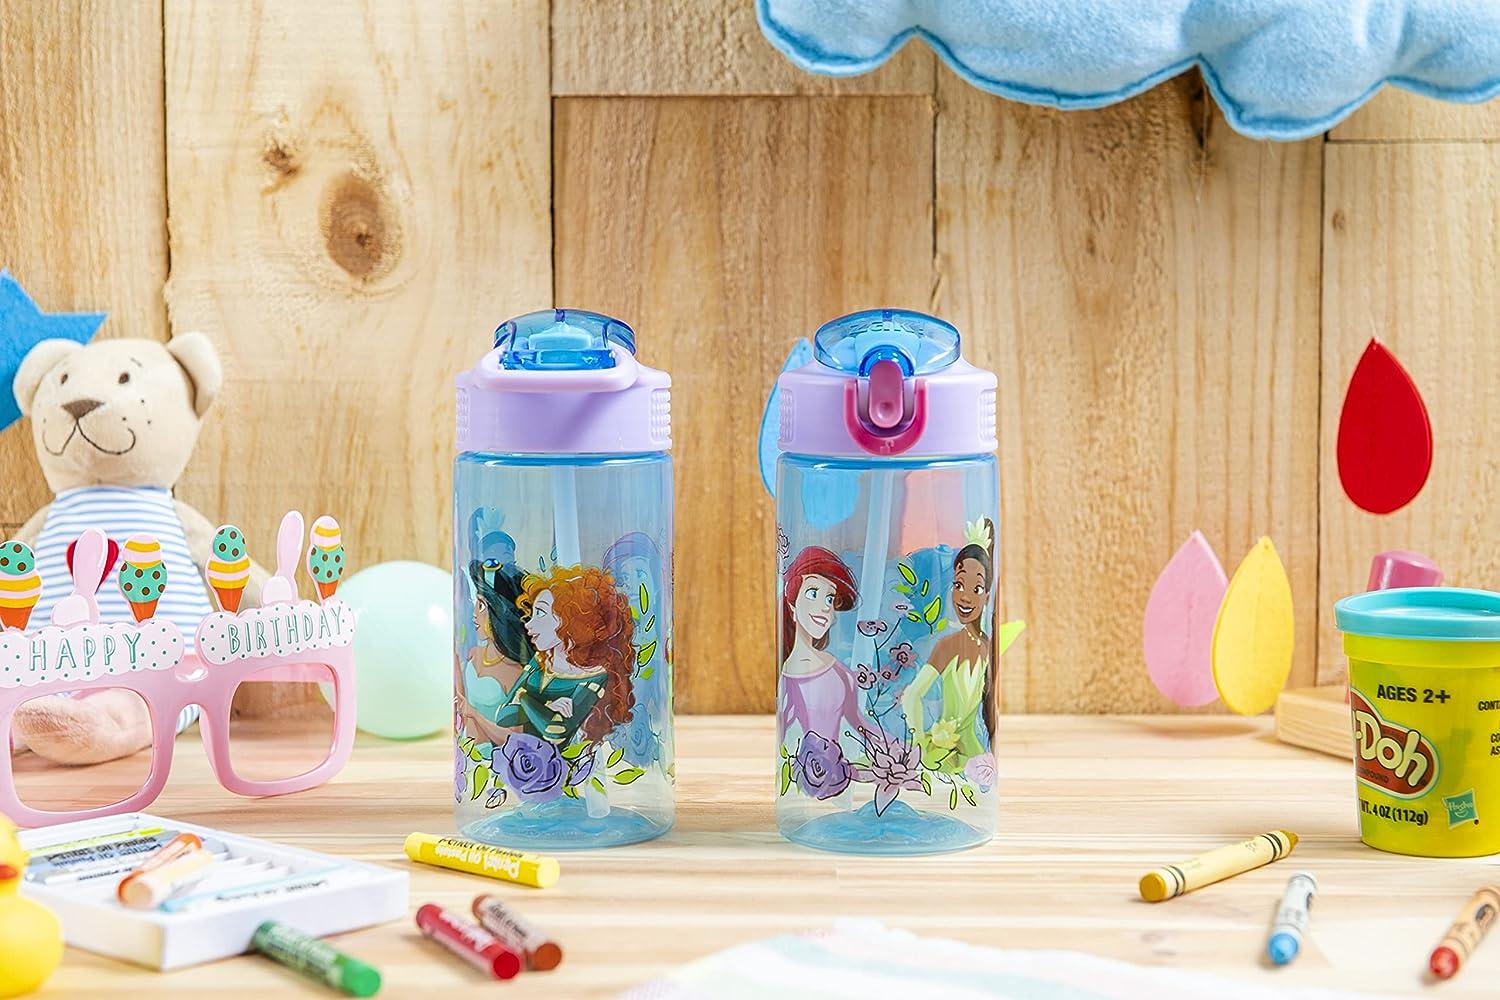 Zak Designs 2pc 16 oz Disney Kids Water Bottle Plastic with Easy-Open  Locking Spout Cover for Travel, Princess 